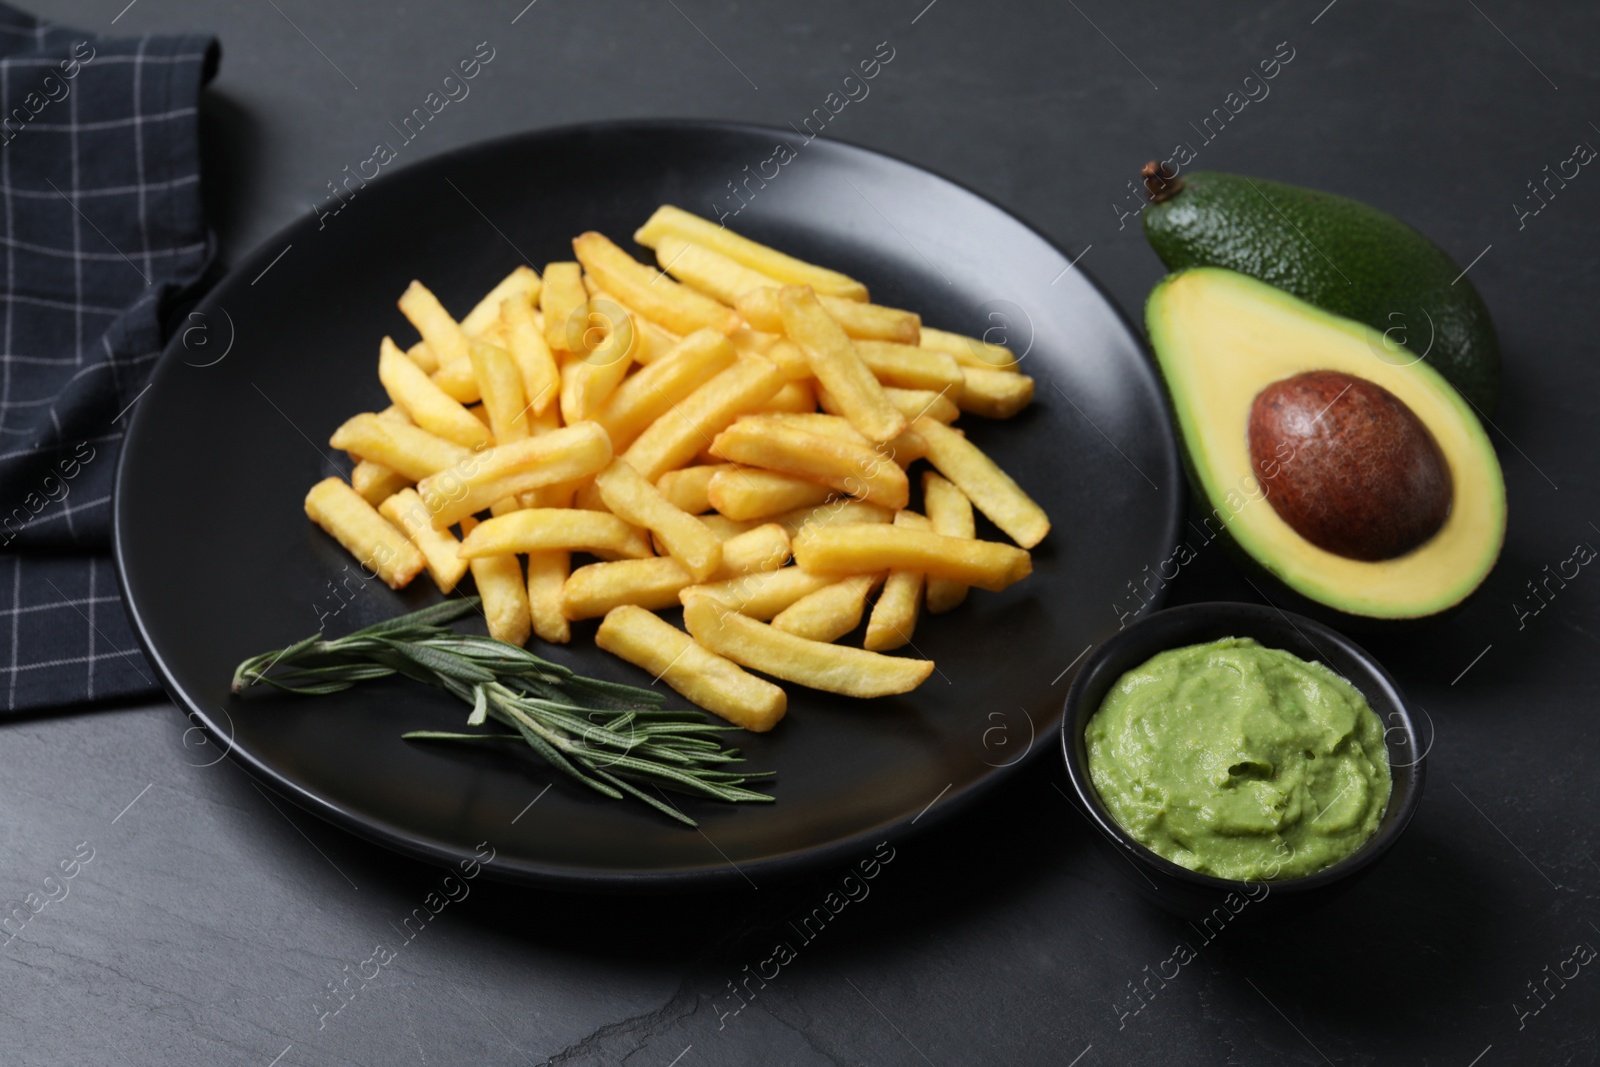 Photo of Plate with french fries, guacamole dip, rosemary and avocado served on black table